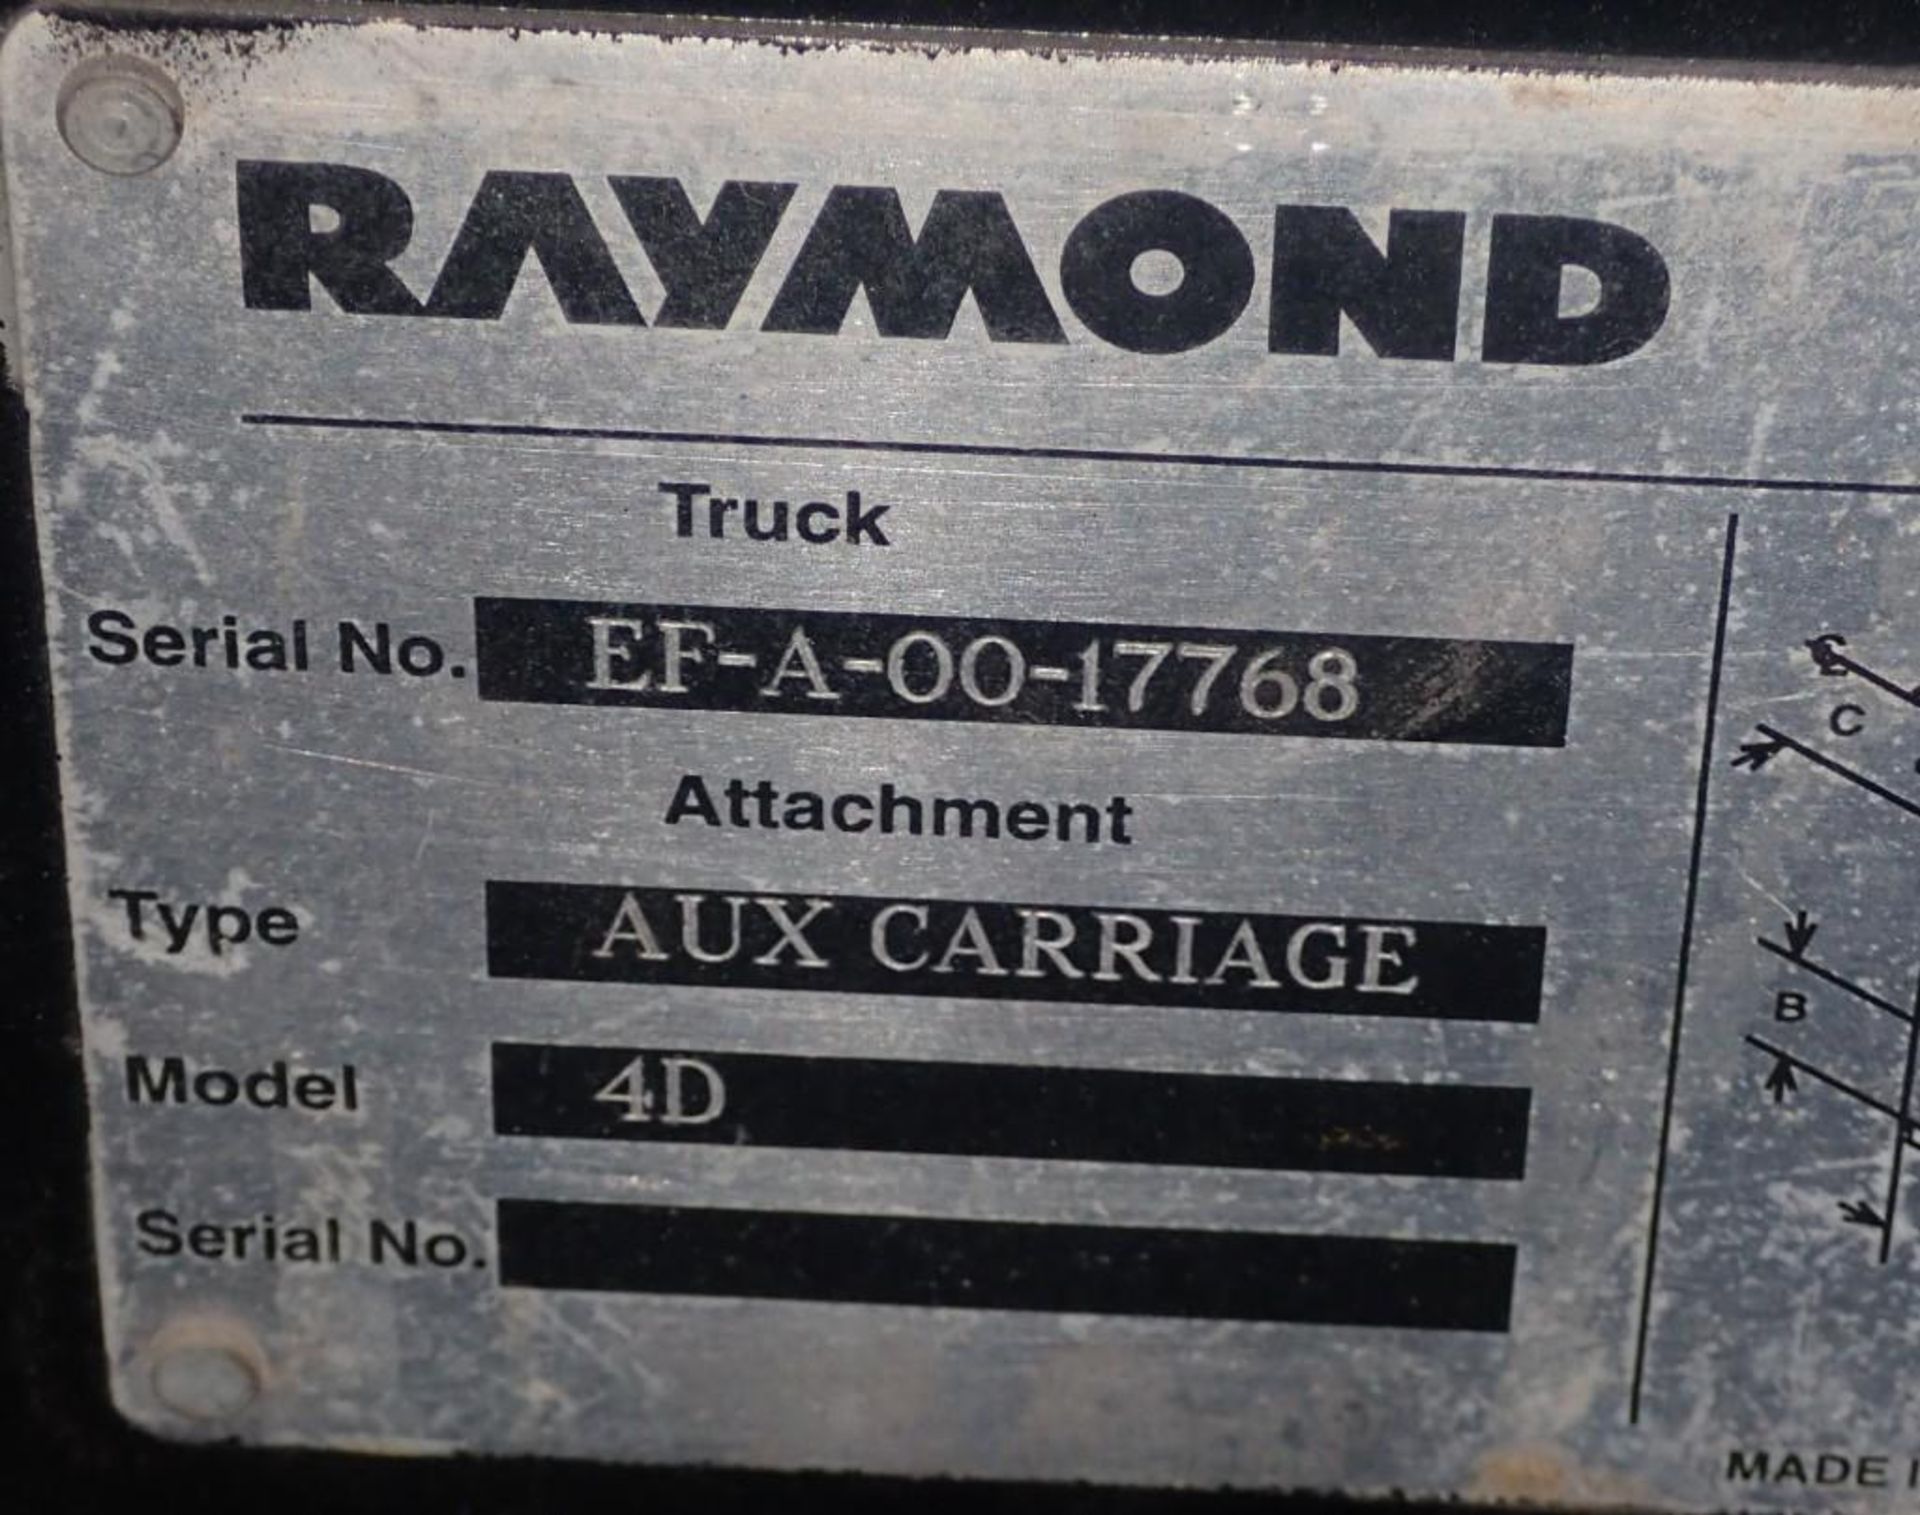 4000 Lb Raymond Auxiliary Carriage - Image 6 of 6